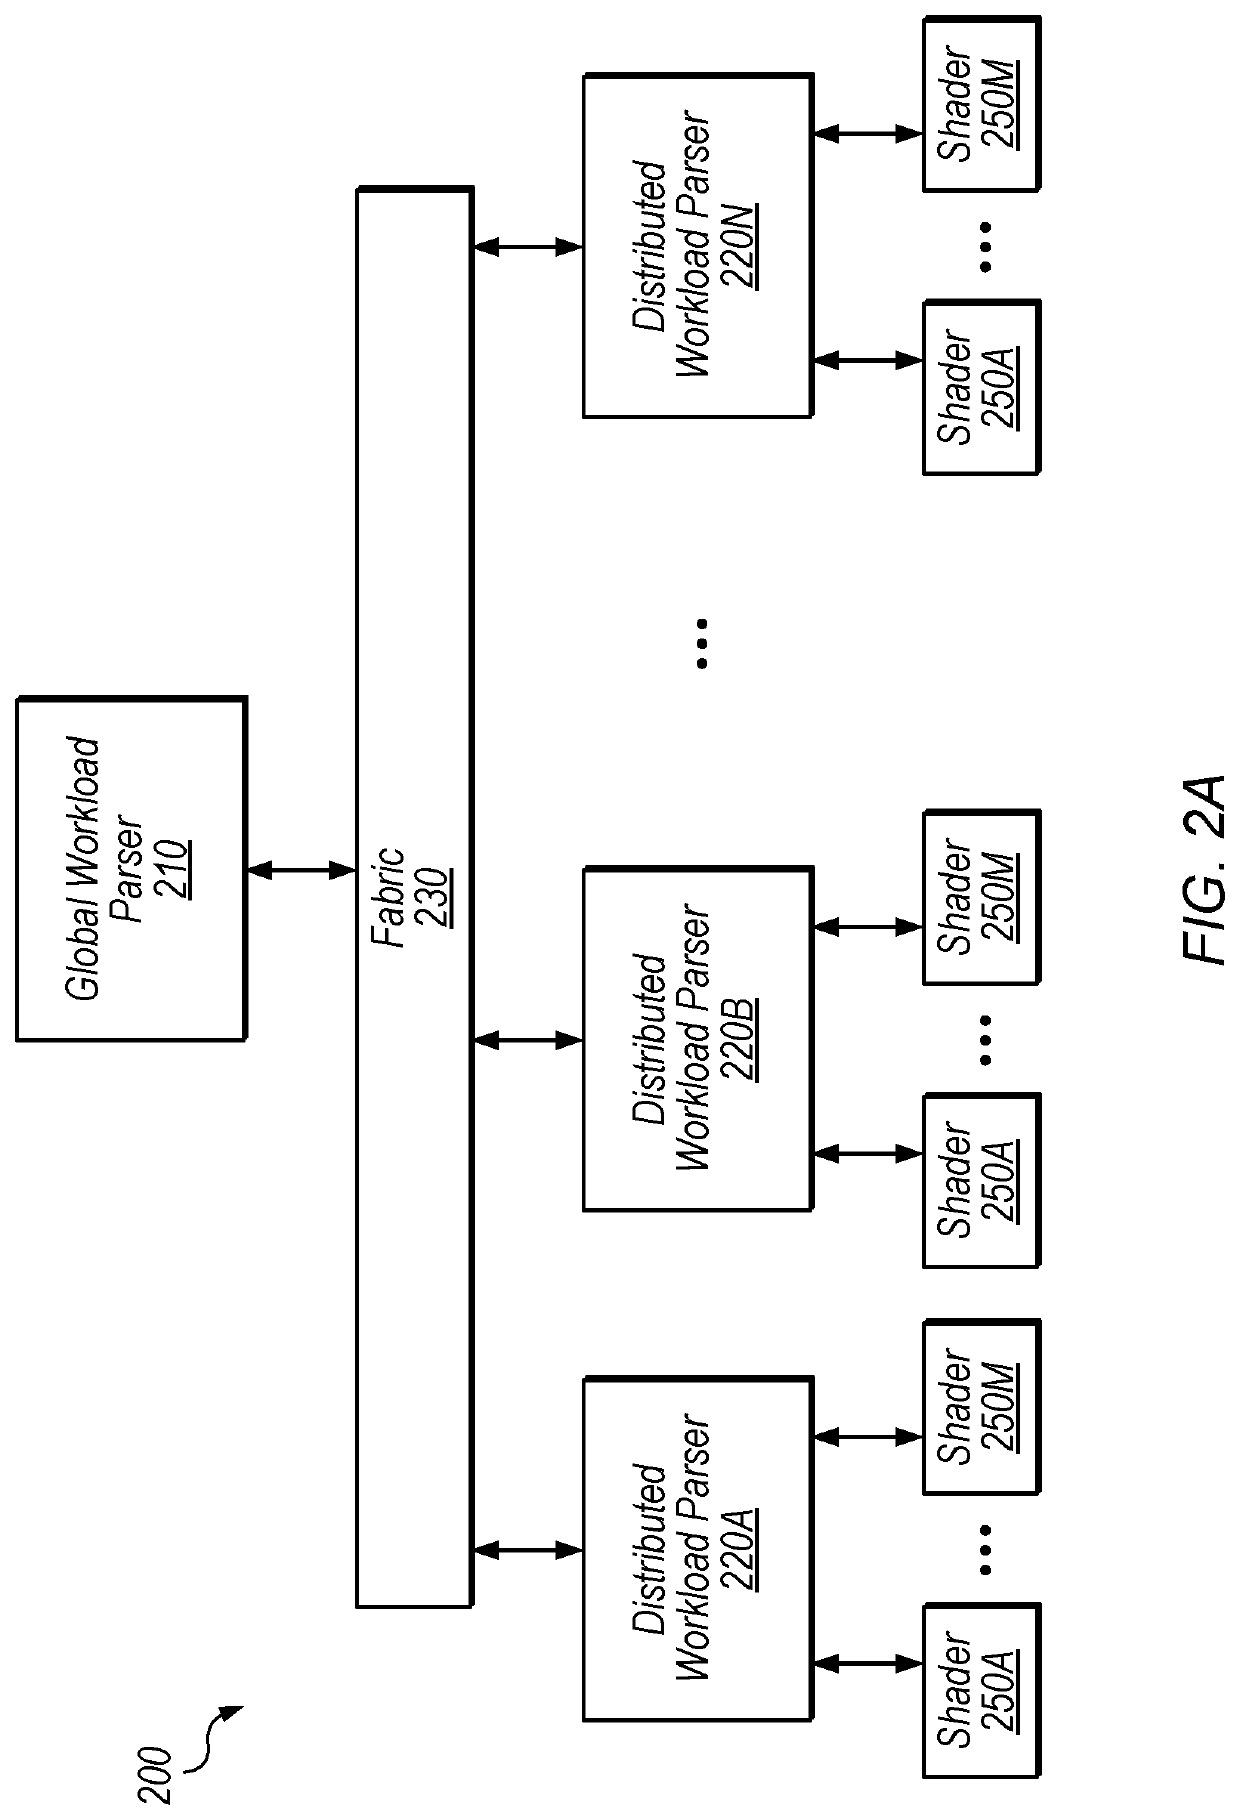 Distributed Compute Work Parser Circuitry using Communications Fabric